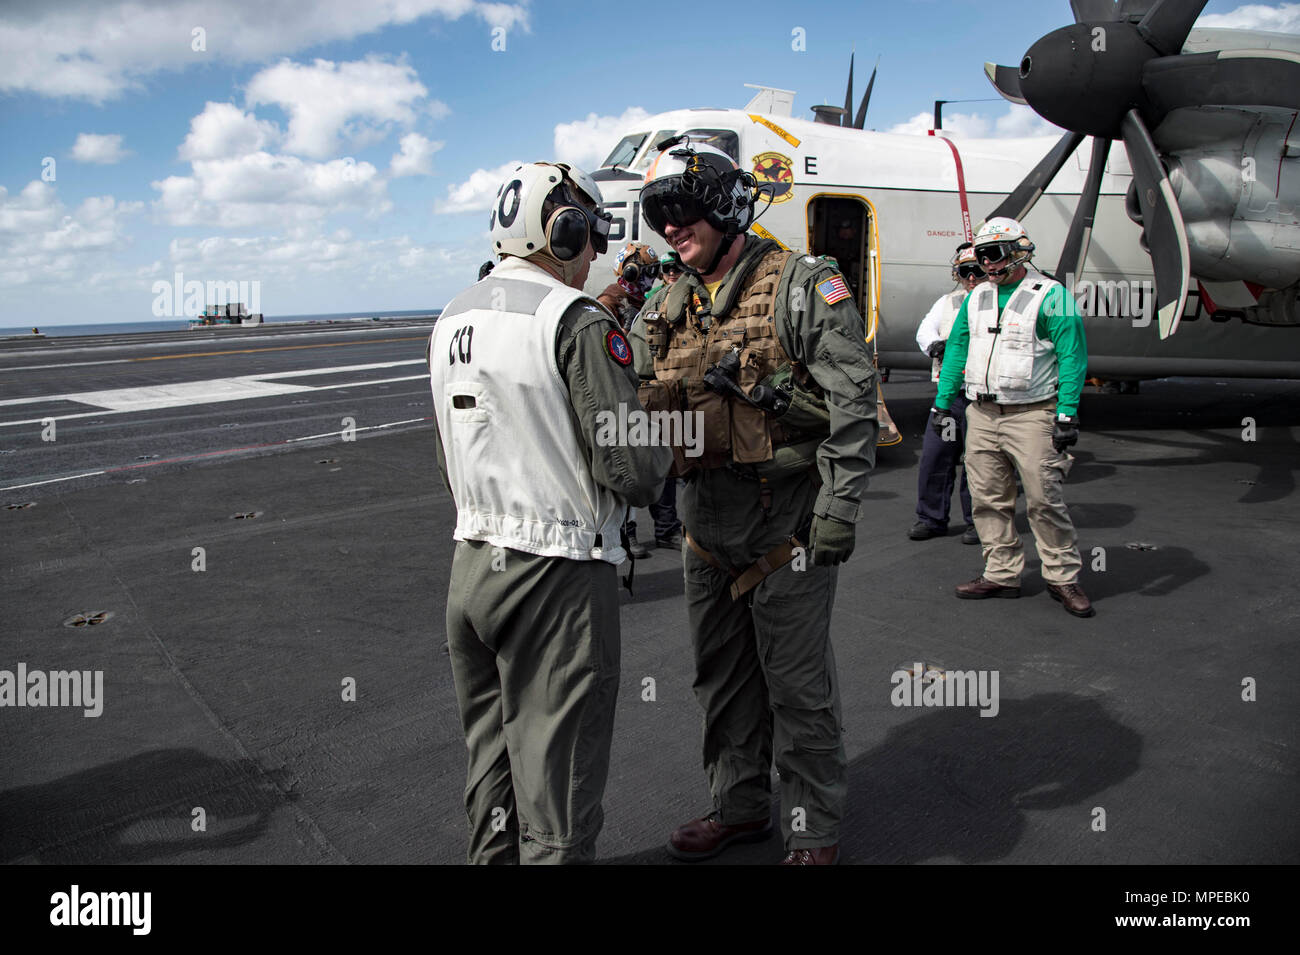 170211-N-OS569-445  ATLANTIC OCEAN (Feb. 11, 2017) Capt. Paul C. Spedero Jr., left, commanding officer of the aircraft carrier USS Dwight D. Eisenhower (CVN 69) (Ike) greets Cmdr. Mark Litowski, commanding officer of the Rawhides of Fleet Logistics Support Squadron (VRC) 40, on the flight deck. Ike is currently conducting aircraft carrier qualifications during the sustainment phase of the Optimized Fleet Response Plan (OFRP). (U.S. Navy photo by Mass Communication Specialist Seaman Zach Sleeper) Stock Photo